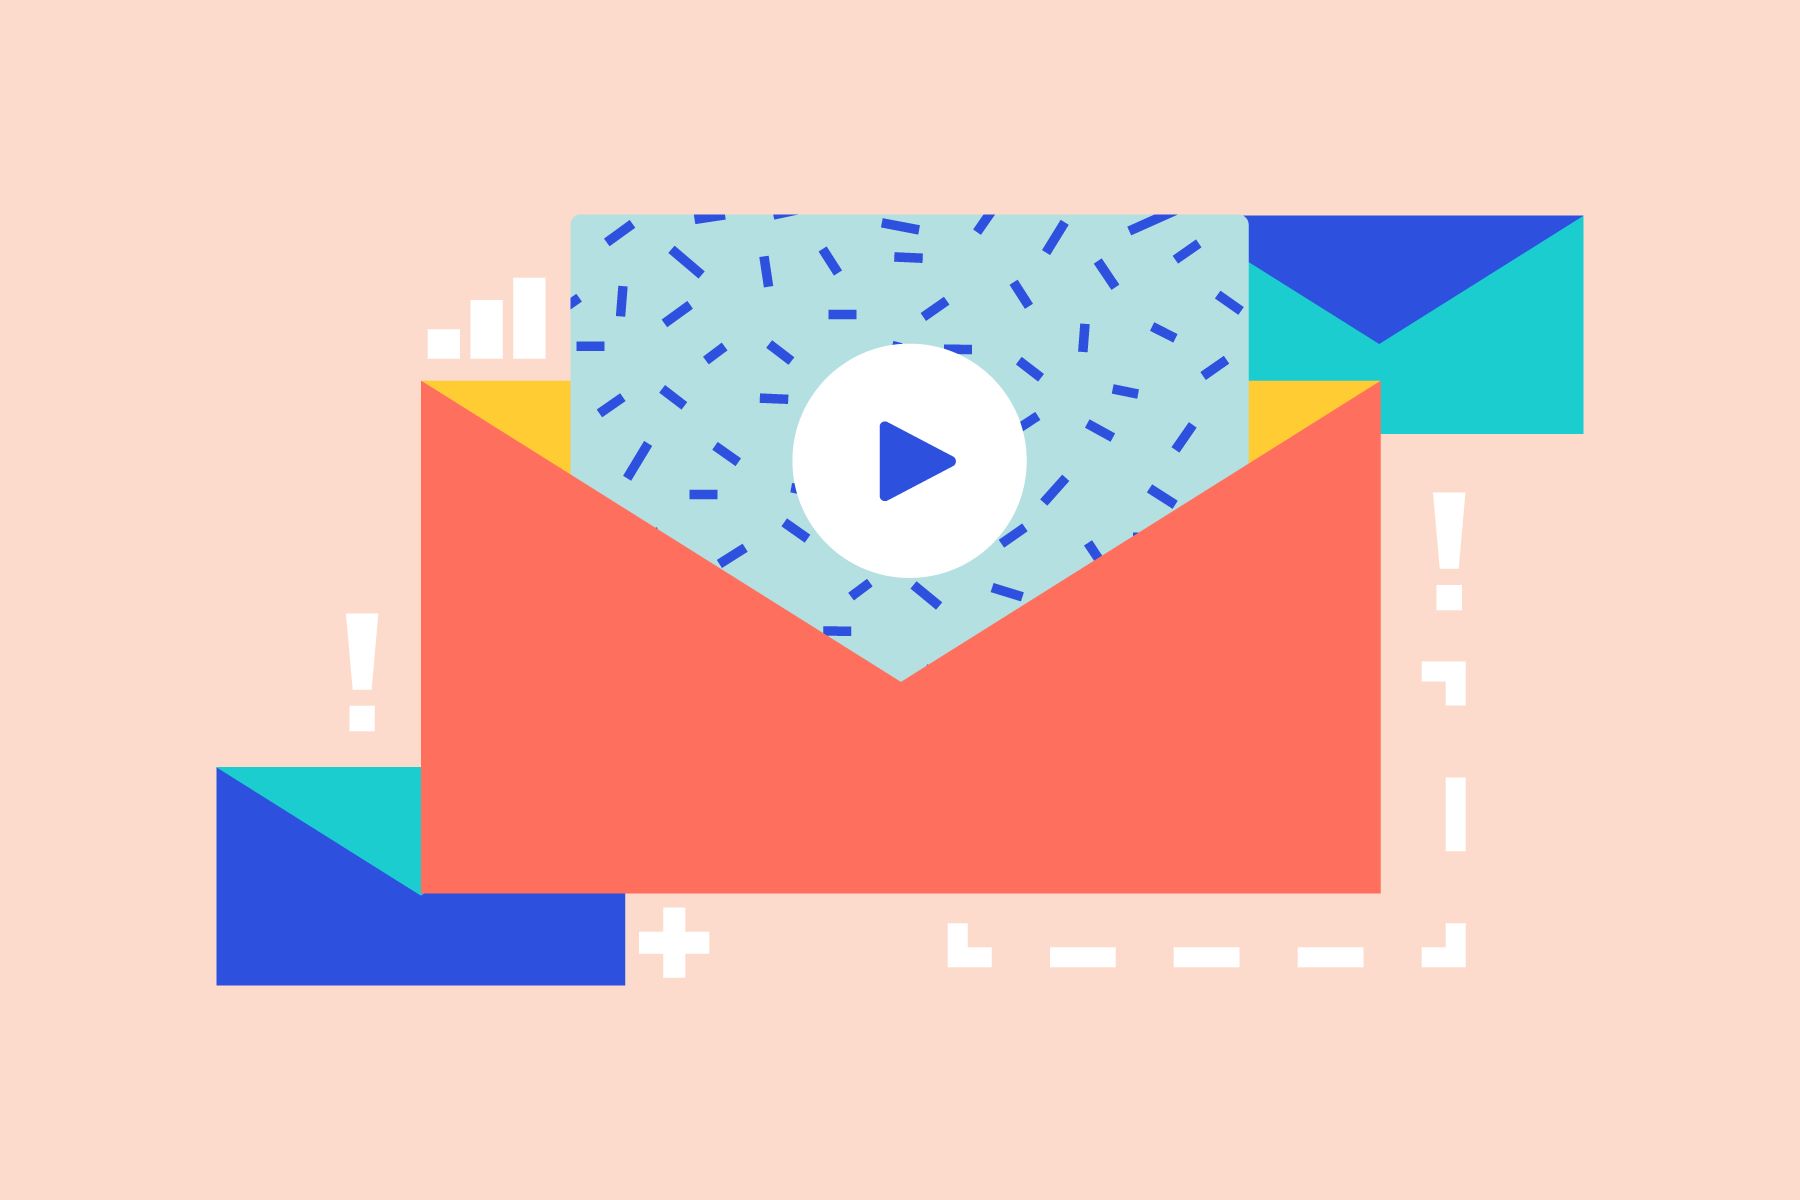 How To Send A Video Via Email That Is Too Big